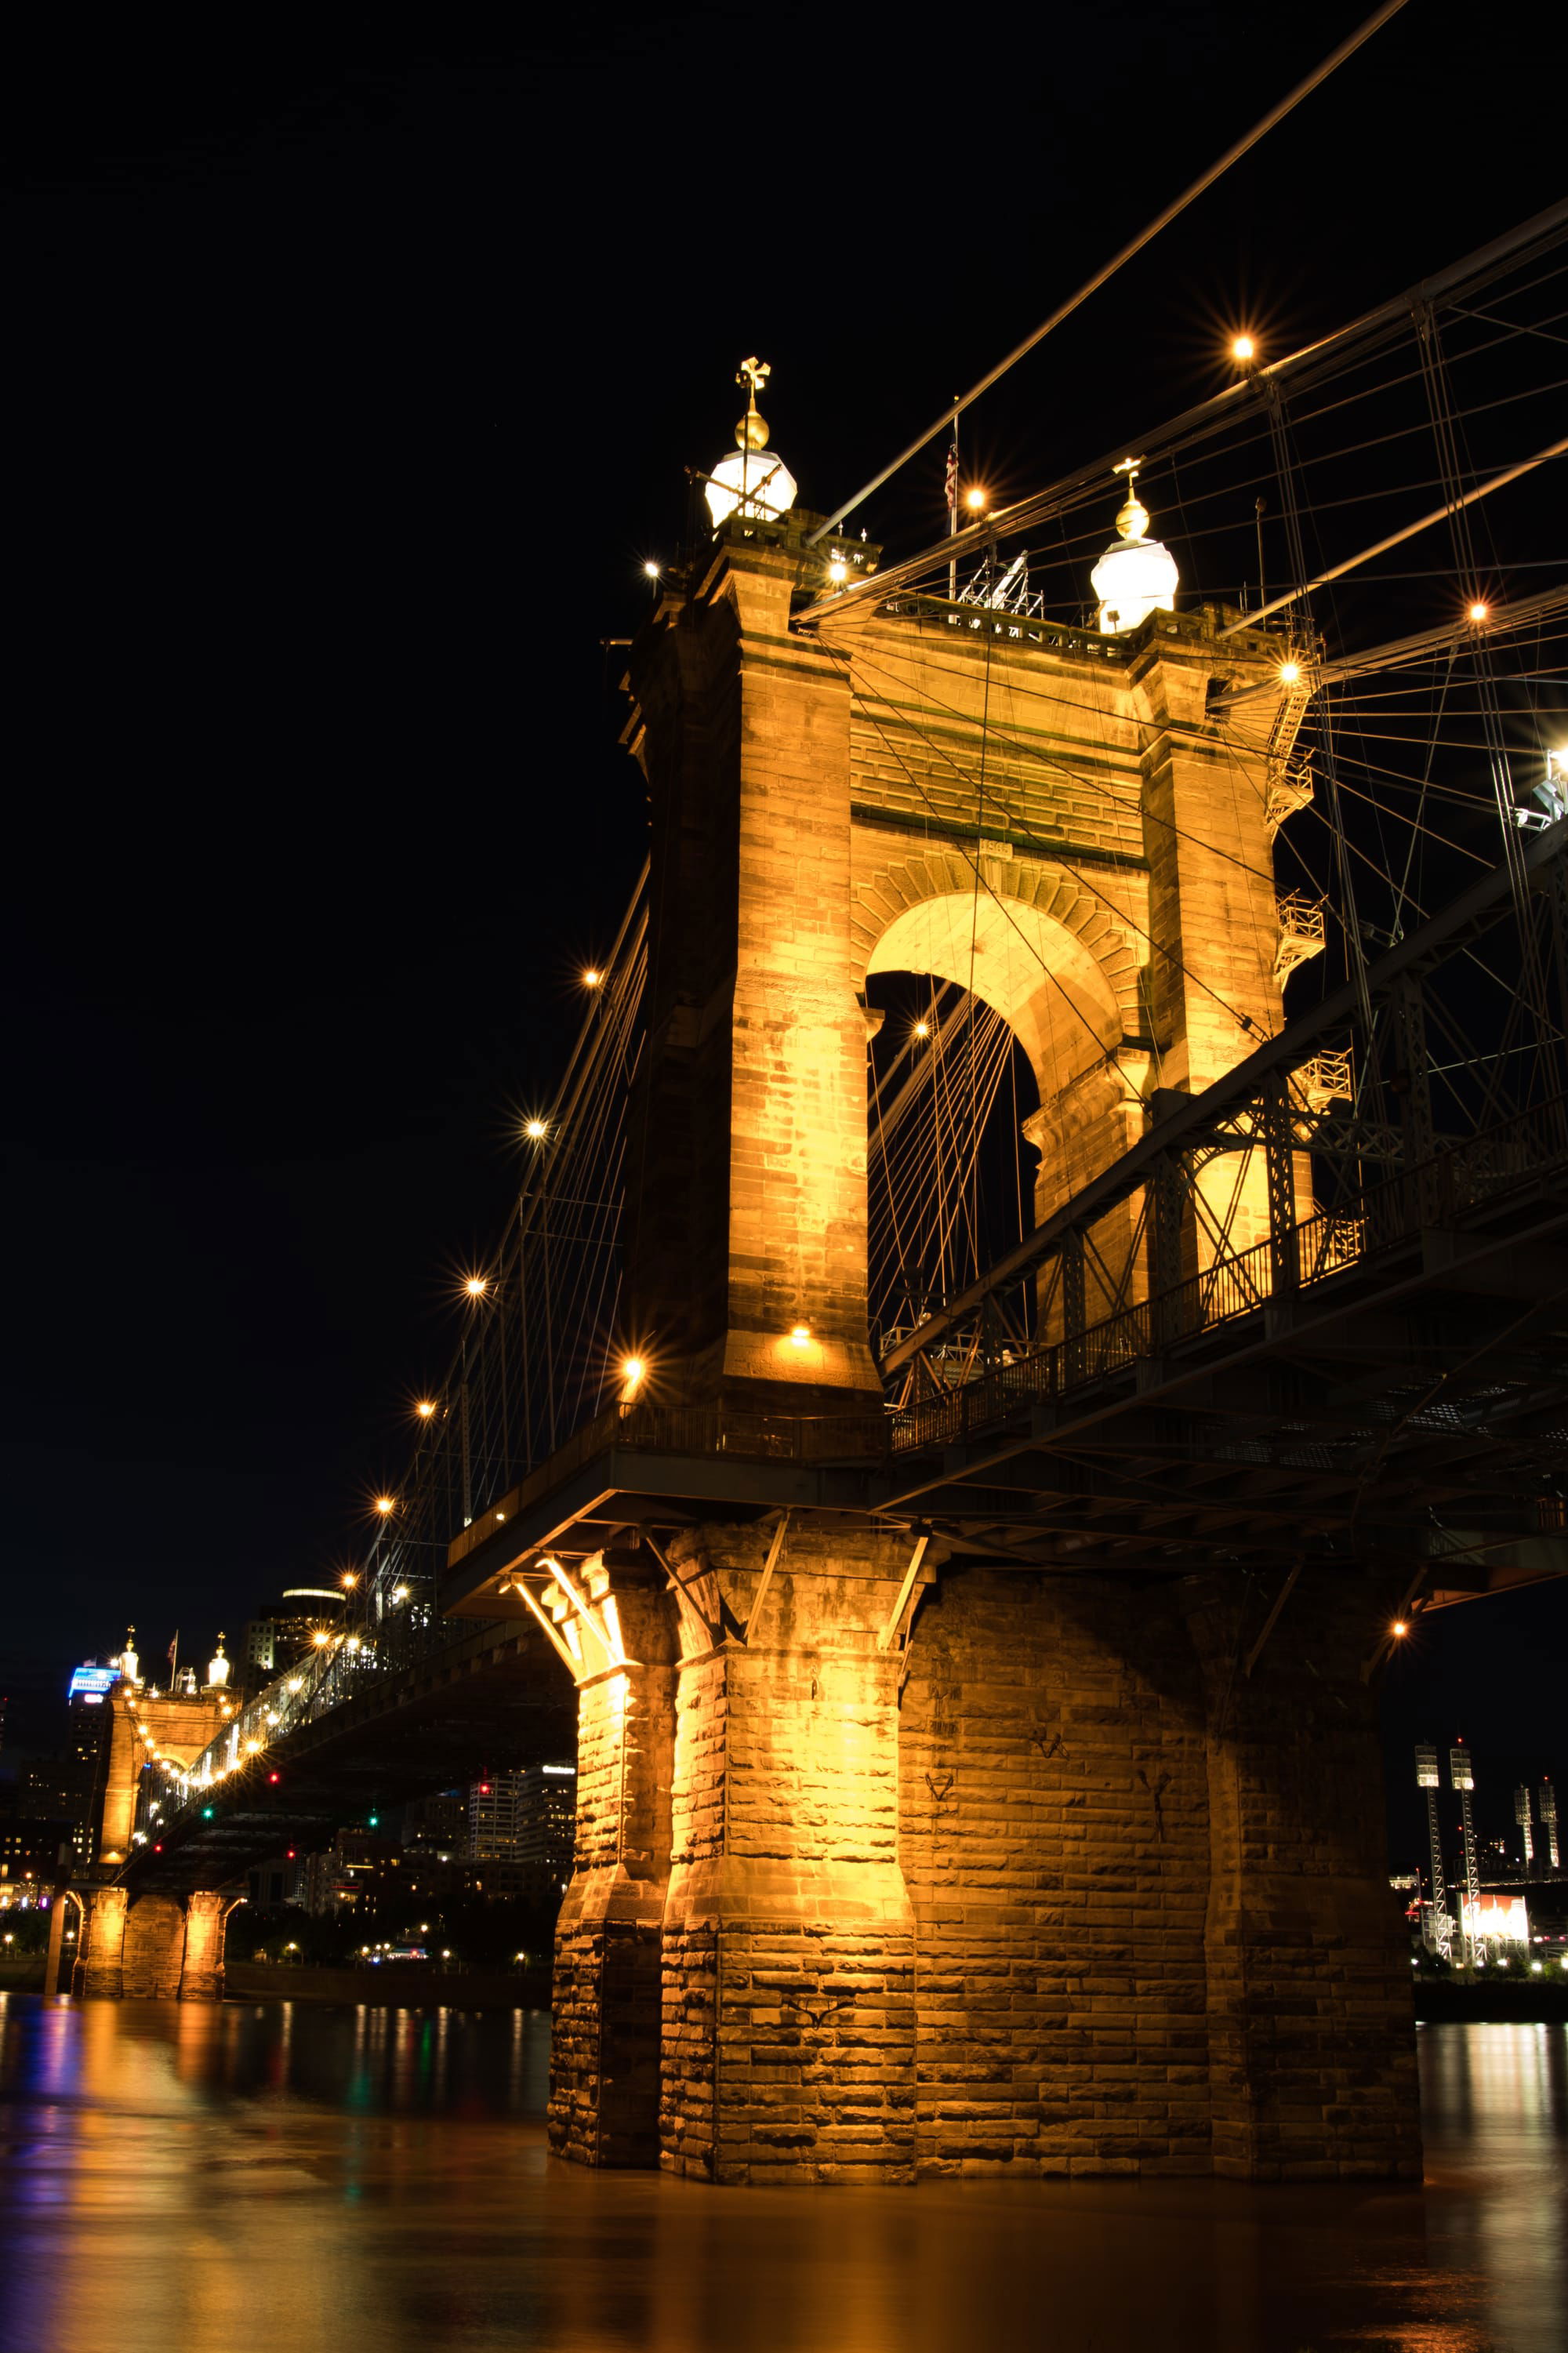 ROEBLING SUSPENSION BRIDGE VIEW FROM COVINGTON, KY